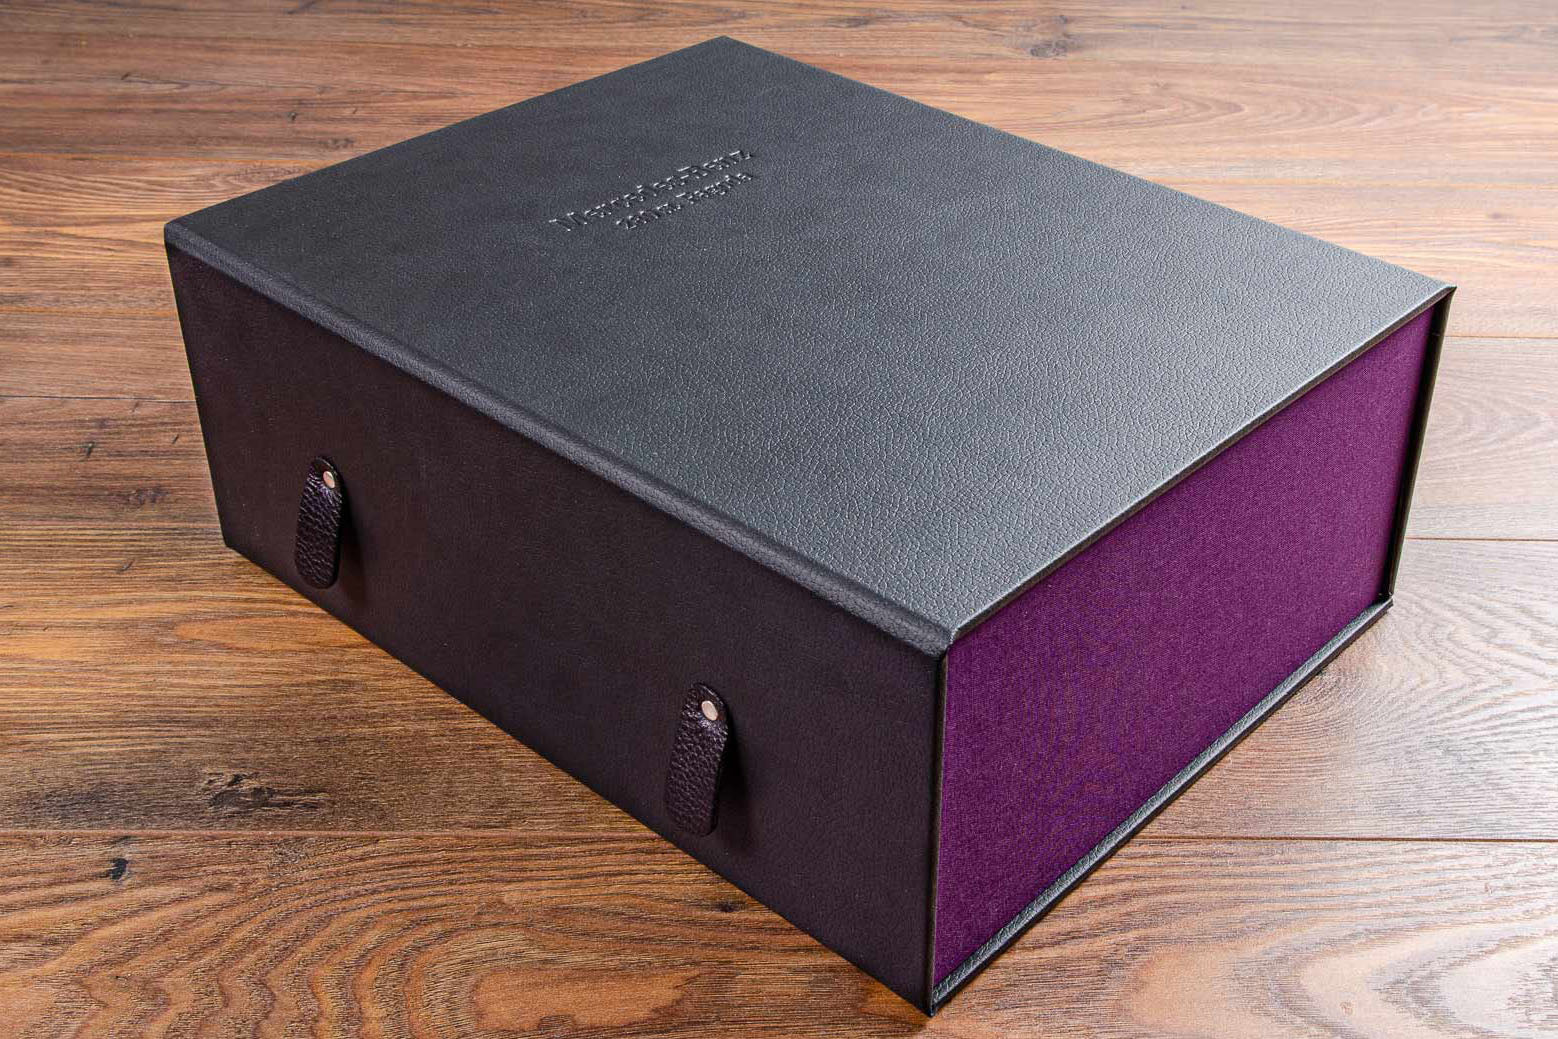 Customised vehicle document box with leather embossment on cover